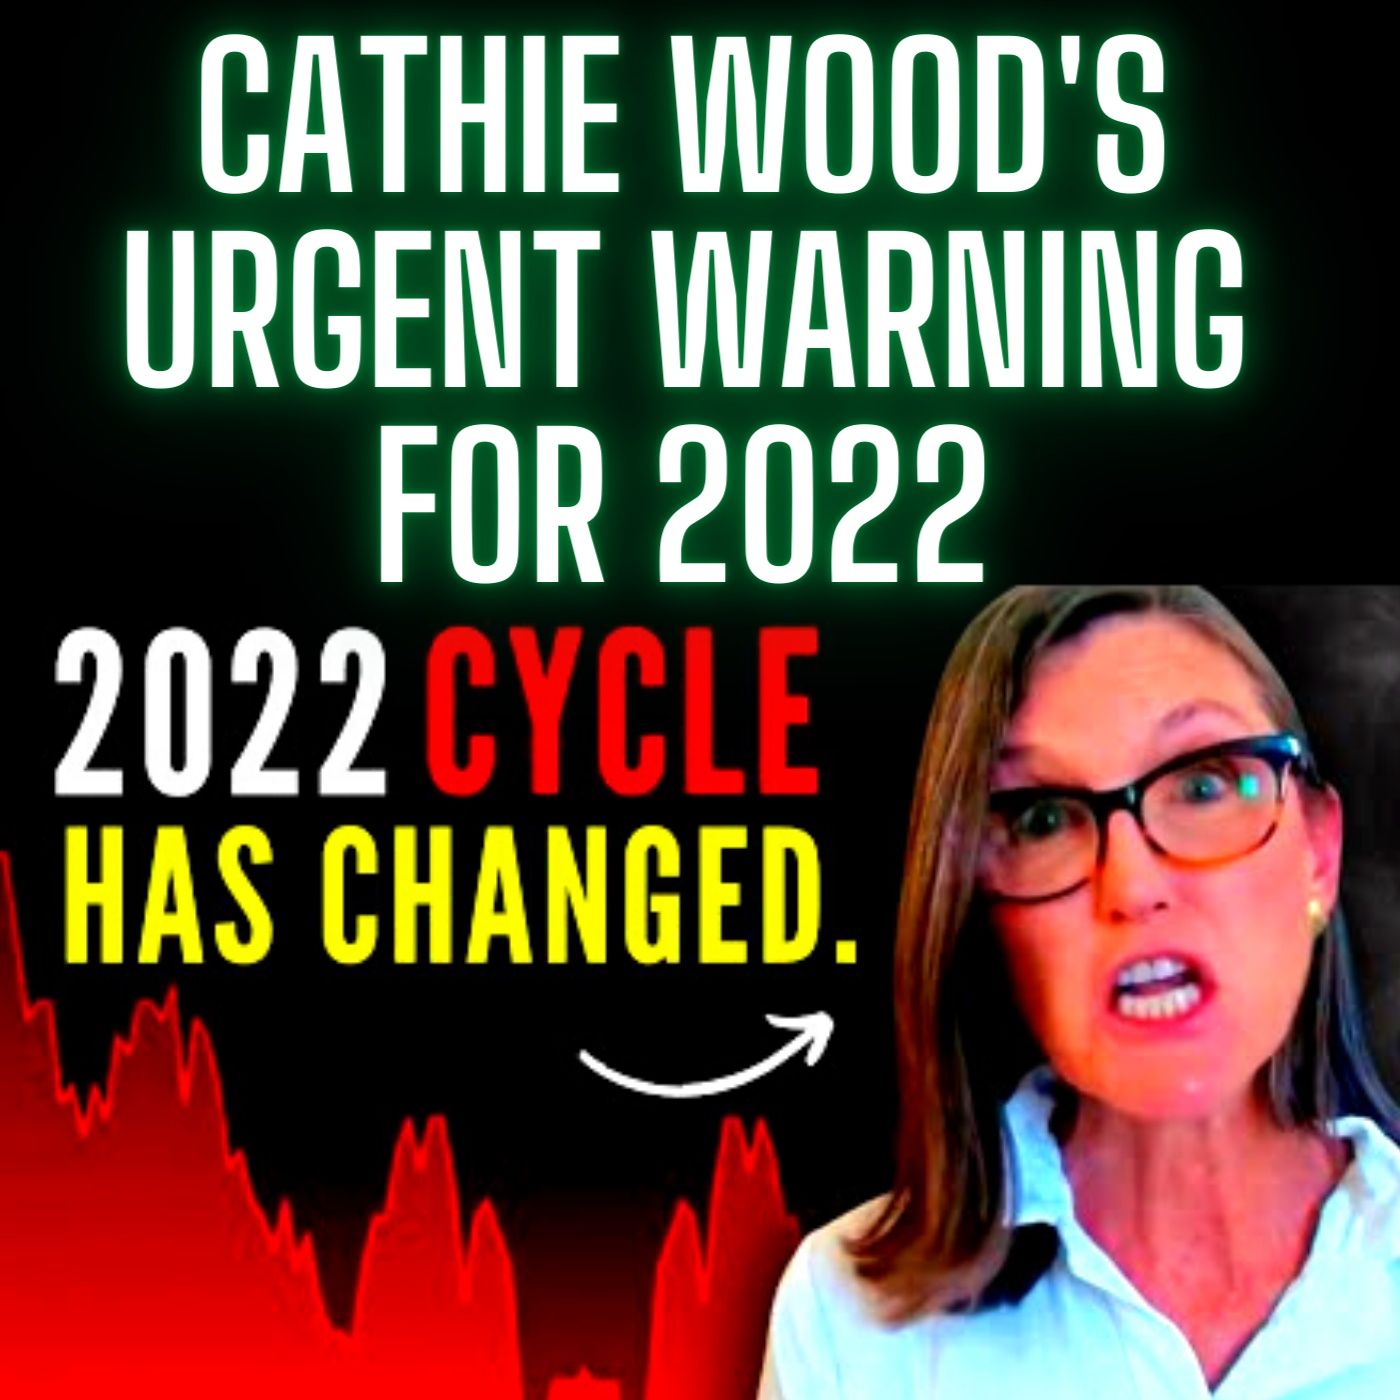 Cathie Wood's URGENT Warning for 2022 - Latest Update On Bitcoin, Ethereum & Innovation